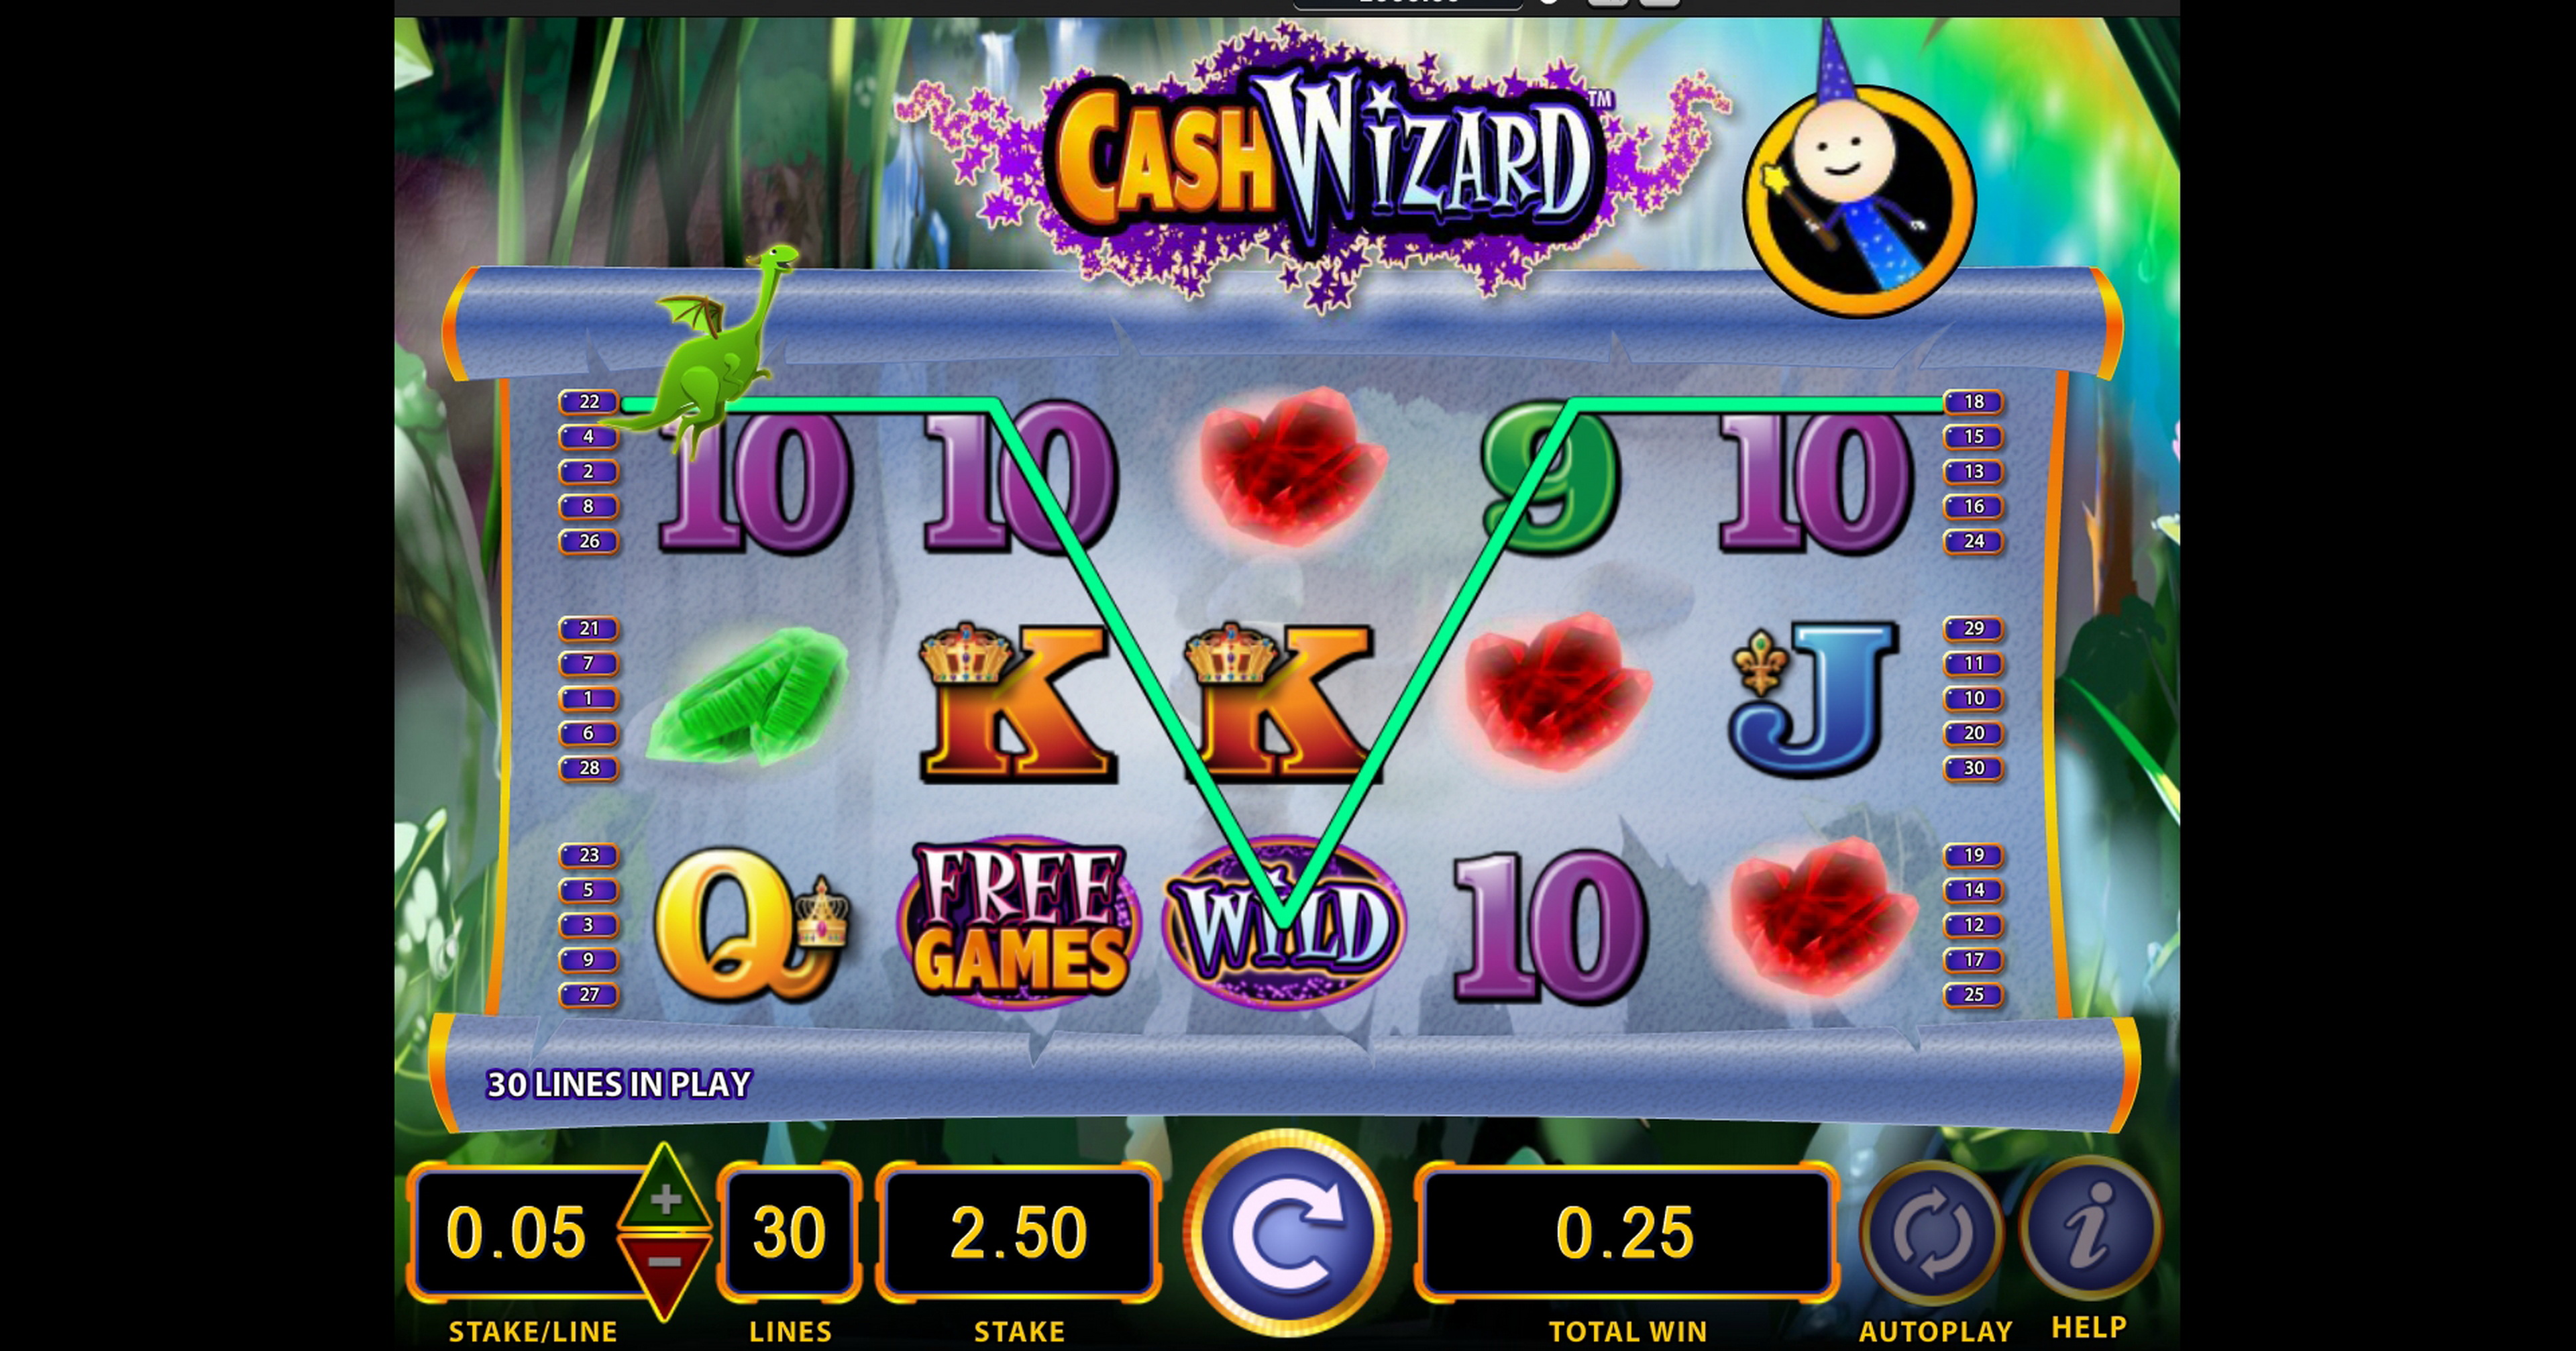 Win Money in Cash Wizard Free Slot Game by Bally Technologies